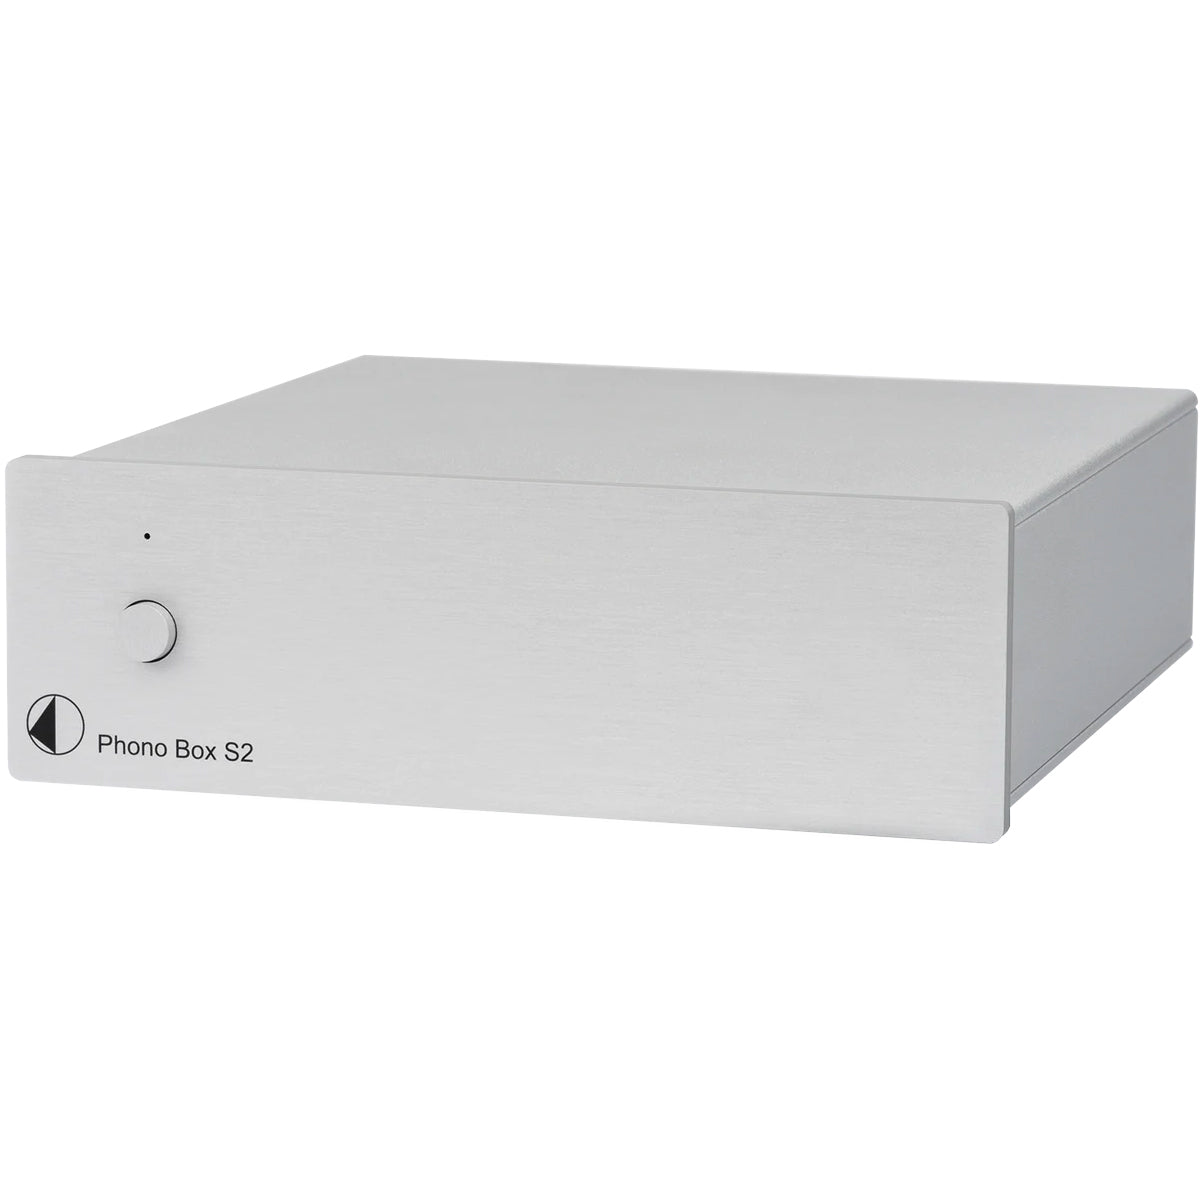 Pro-Ject Phono Box S2 Phono Preamplifier - Silver - The Audio Experts